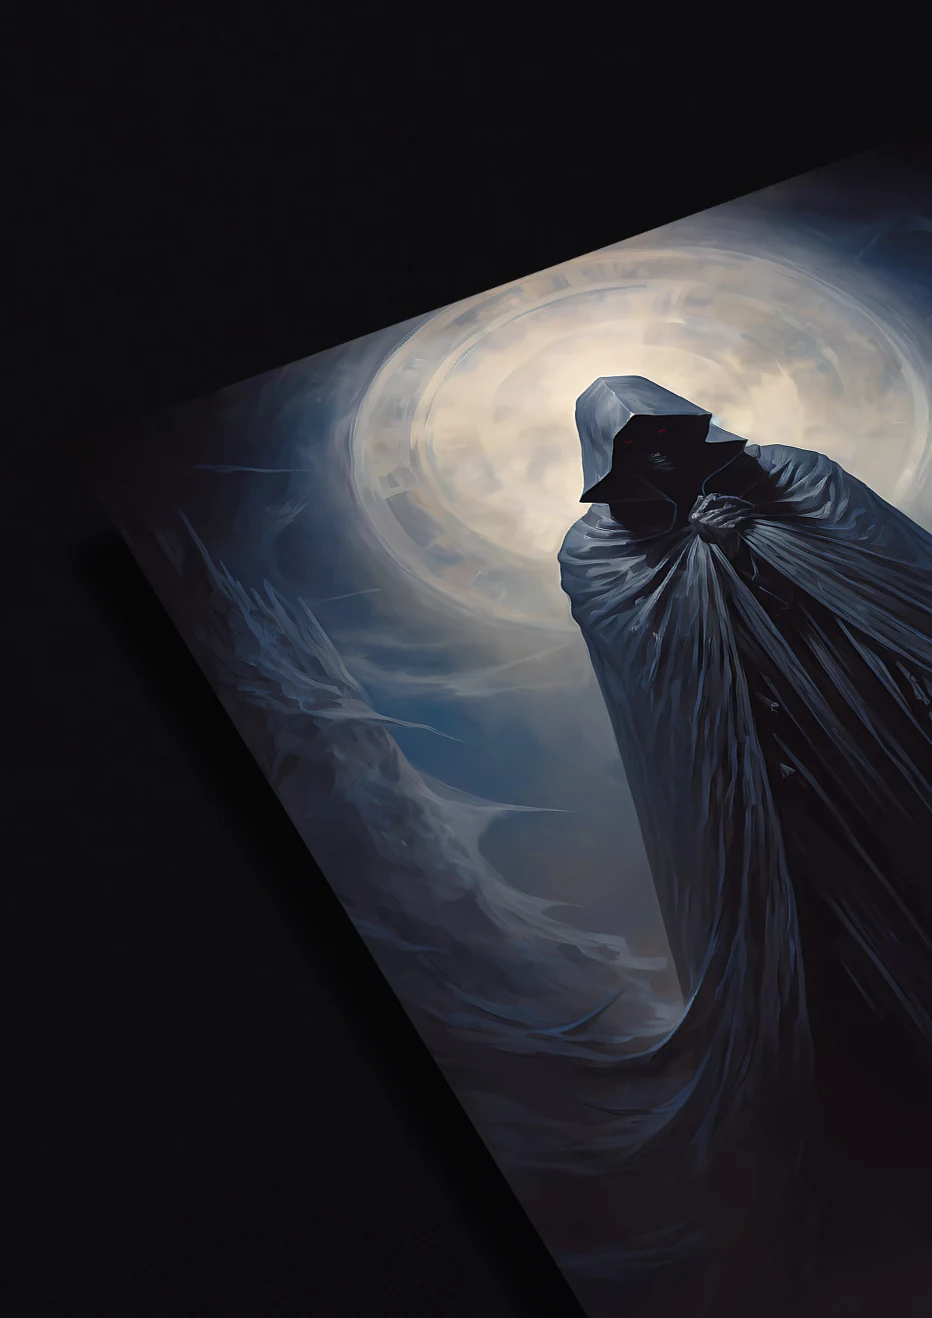 Artwork showing the Dark Presence, a cloaked figure against an eerie backdrop, symbolizing mystery and enigma.